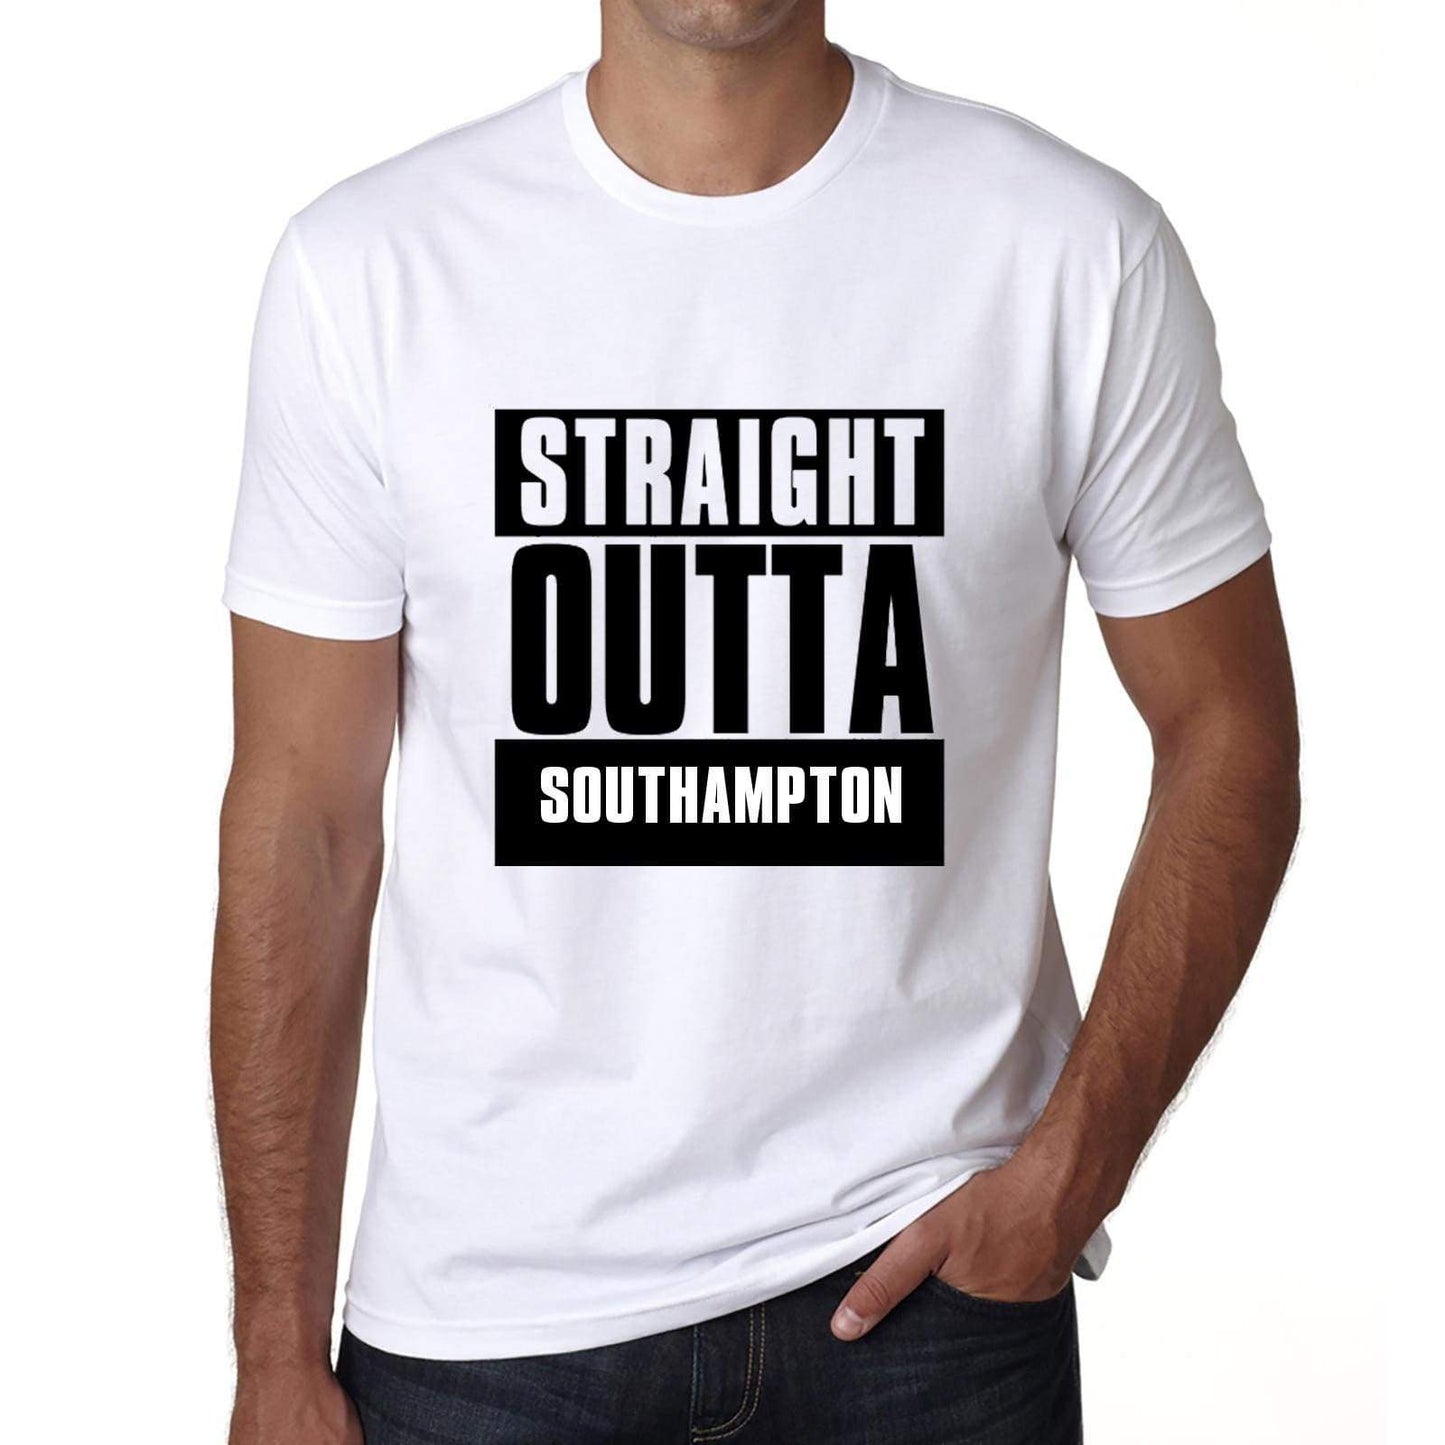 Straight Outta Southampton Mens Short Sleeve Round Neck T-Shirt 00027 - White / S - Casual